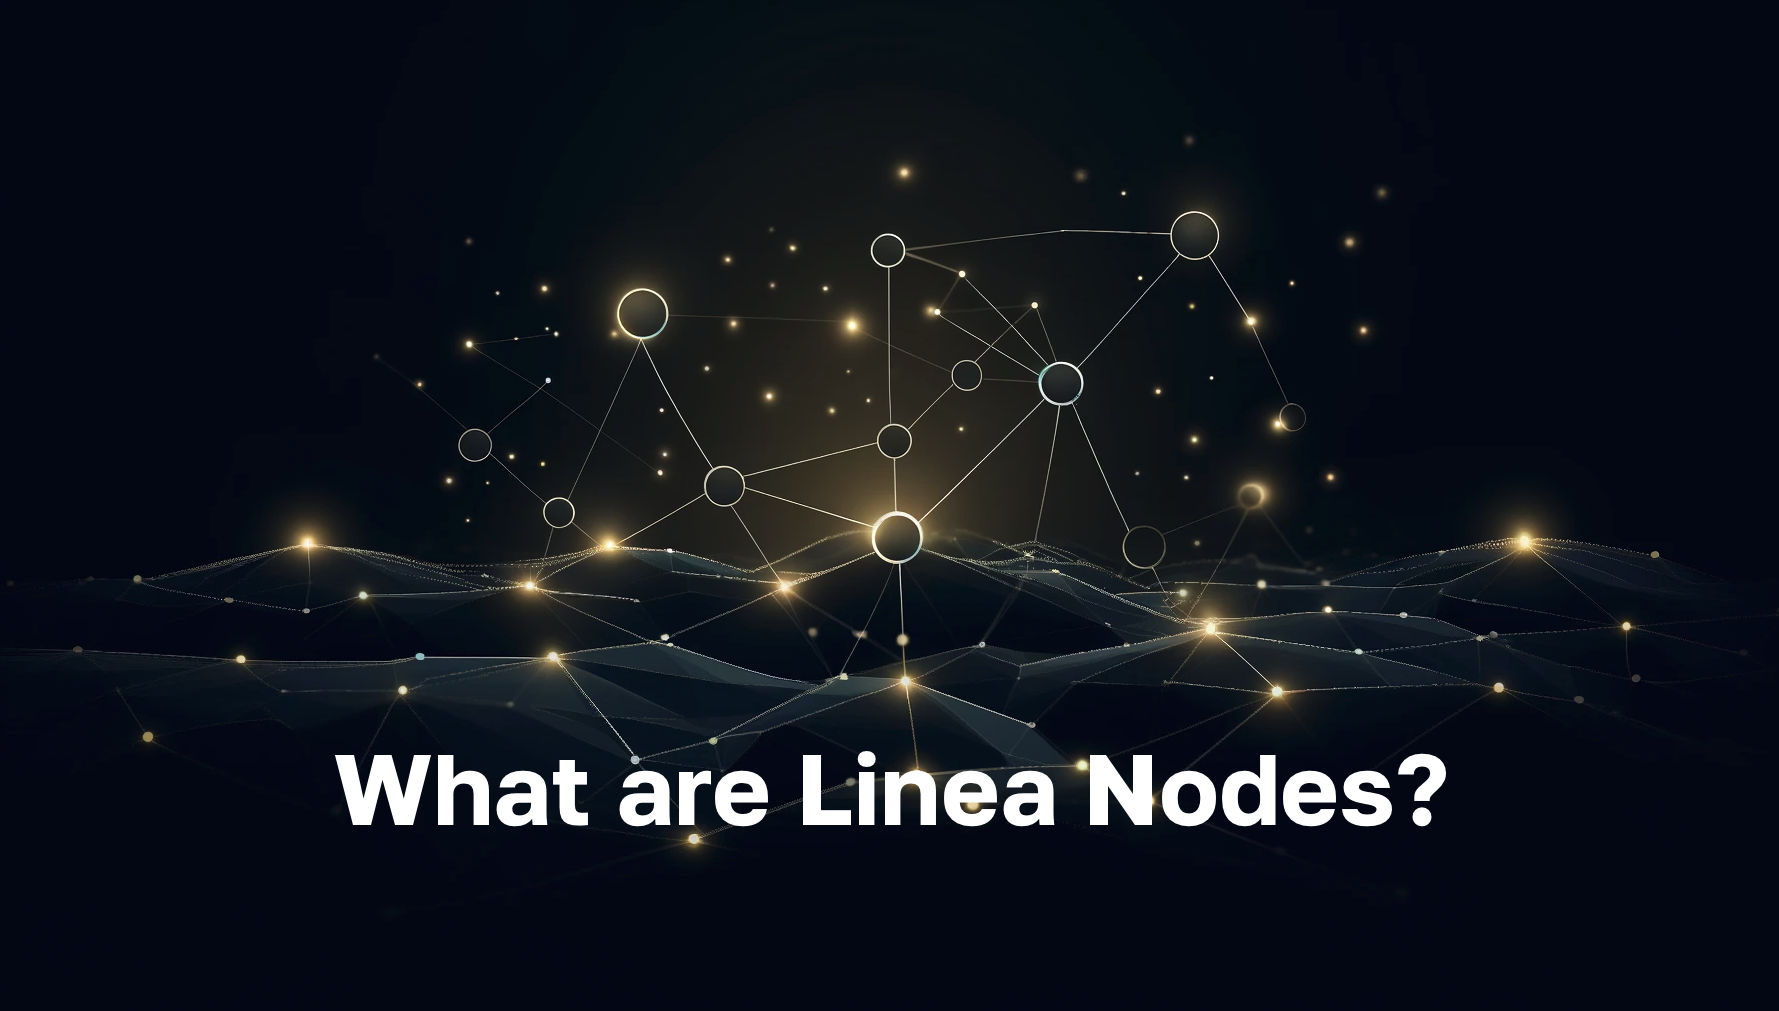 Cluster of nodes with text: "What are Linea Nodes?"